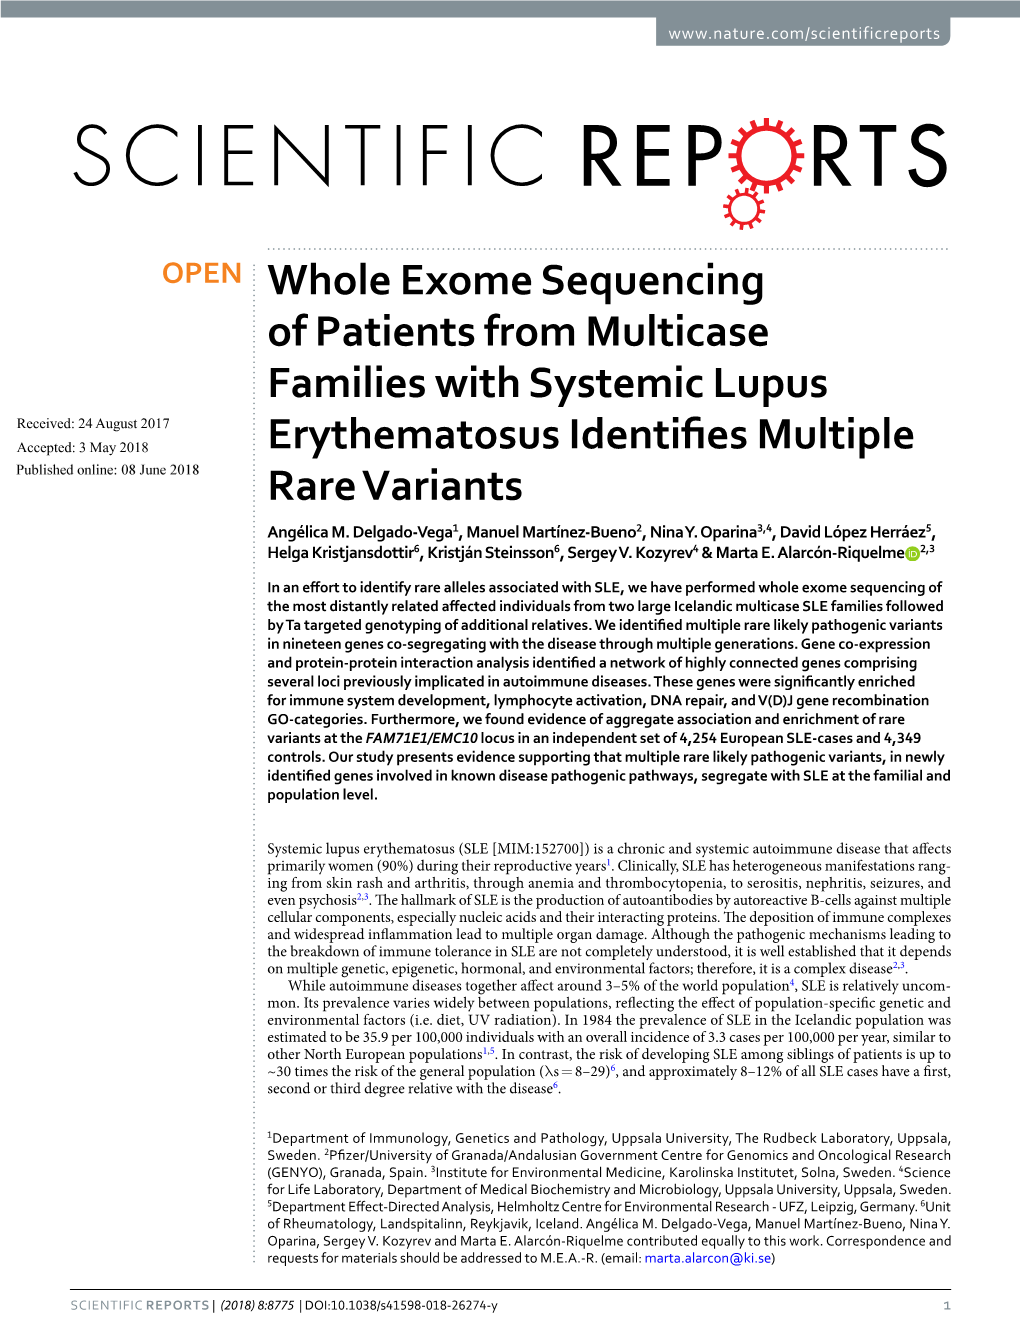 Whole Exome Sequencing of Patients from Multicase Families